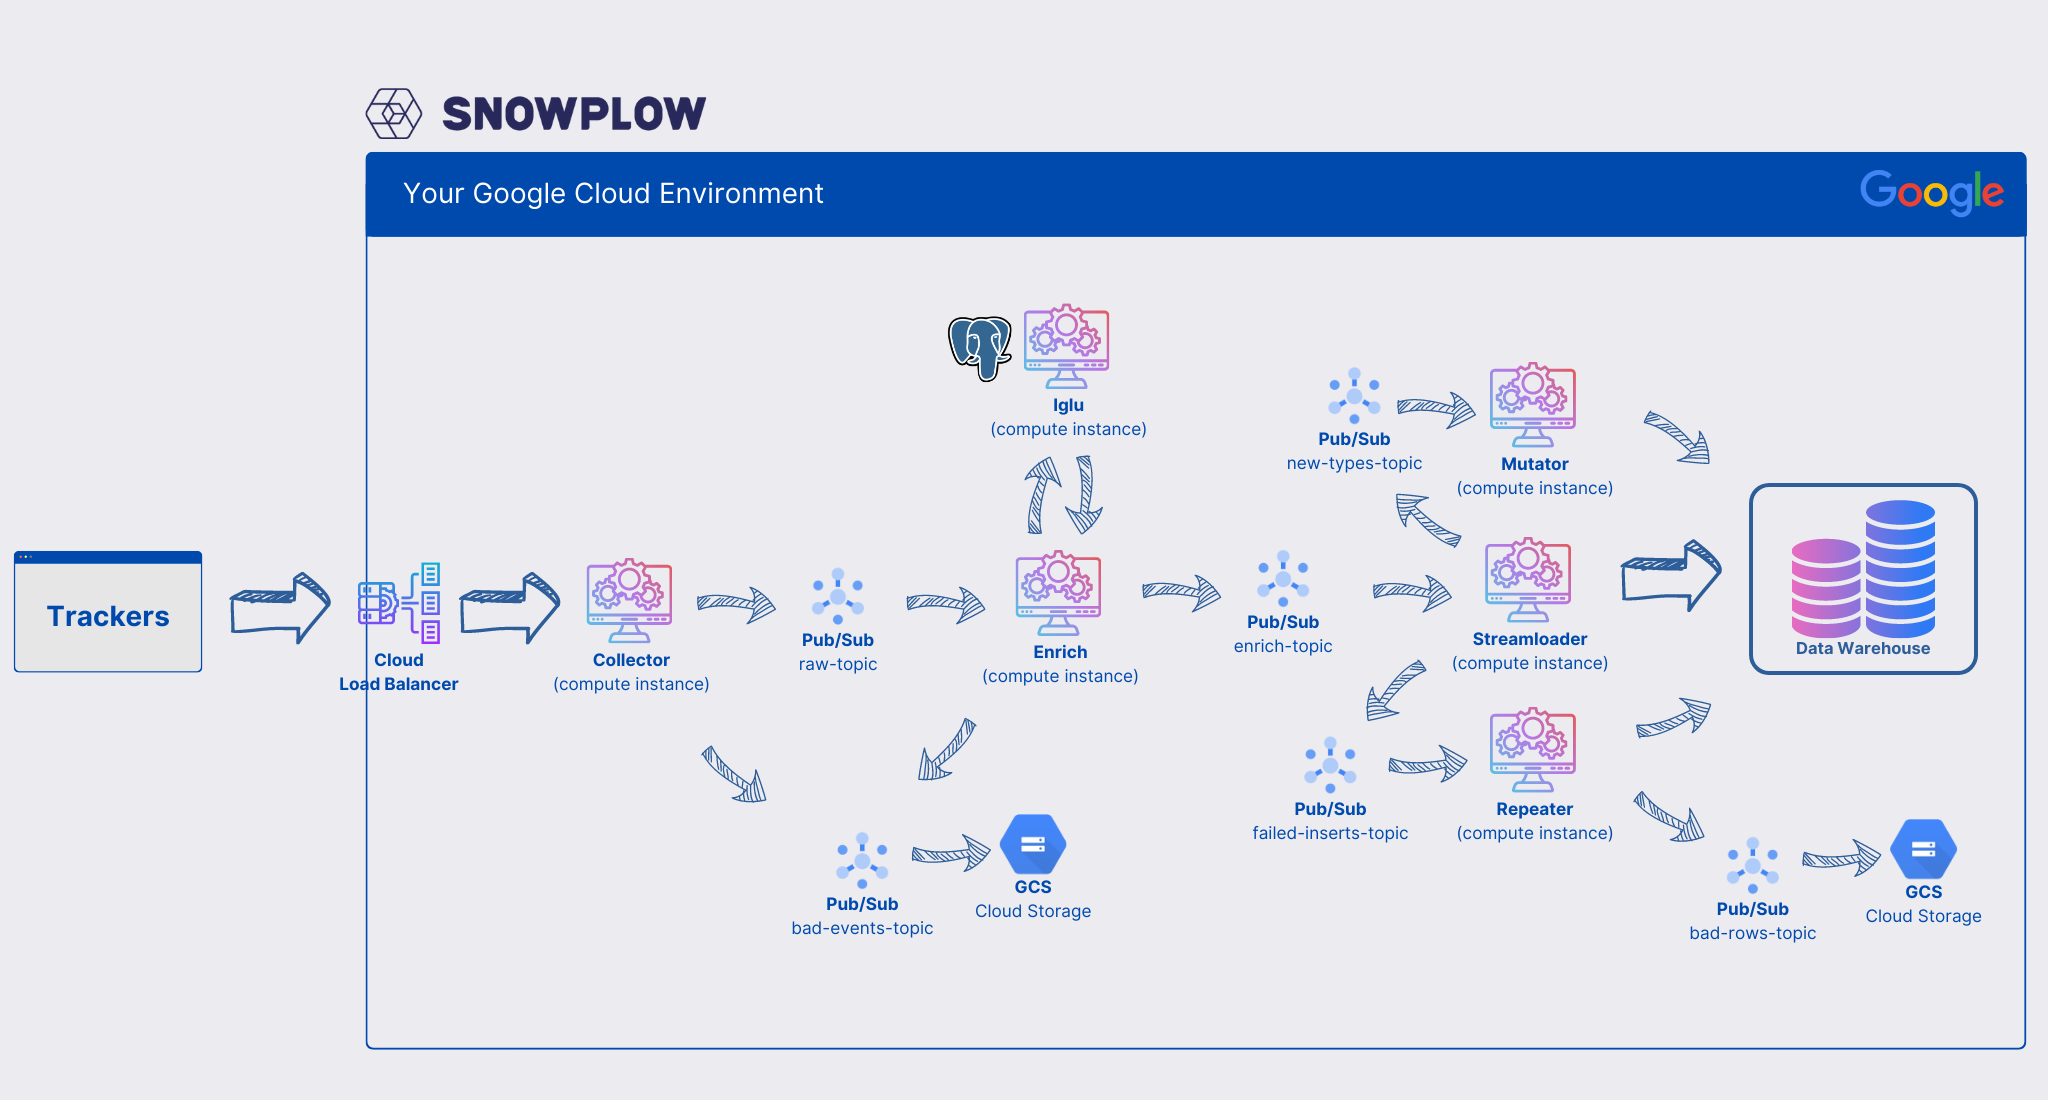 Snowplow reference architecture on GCP